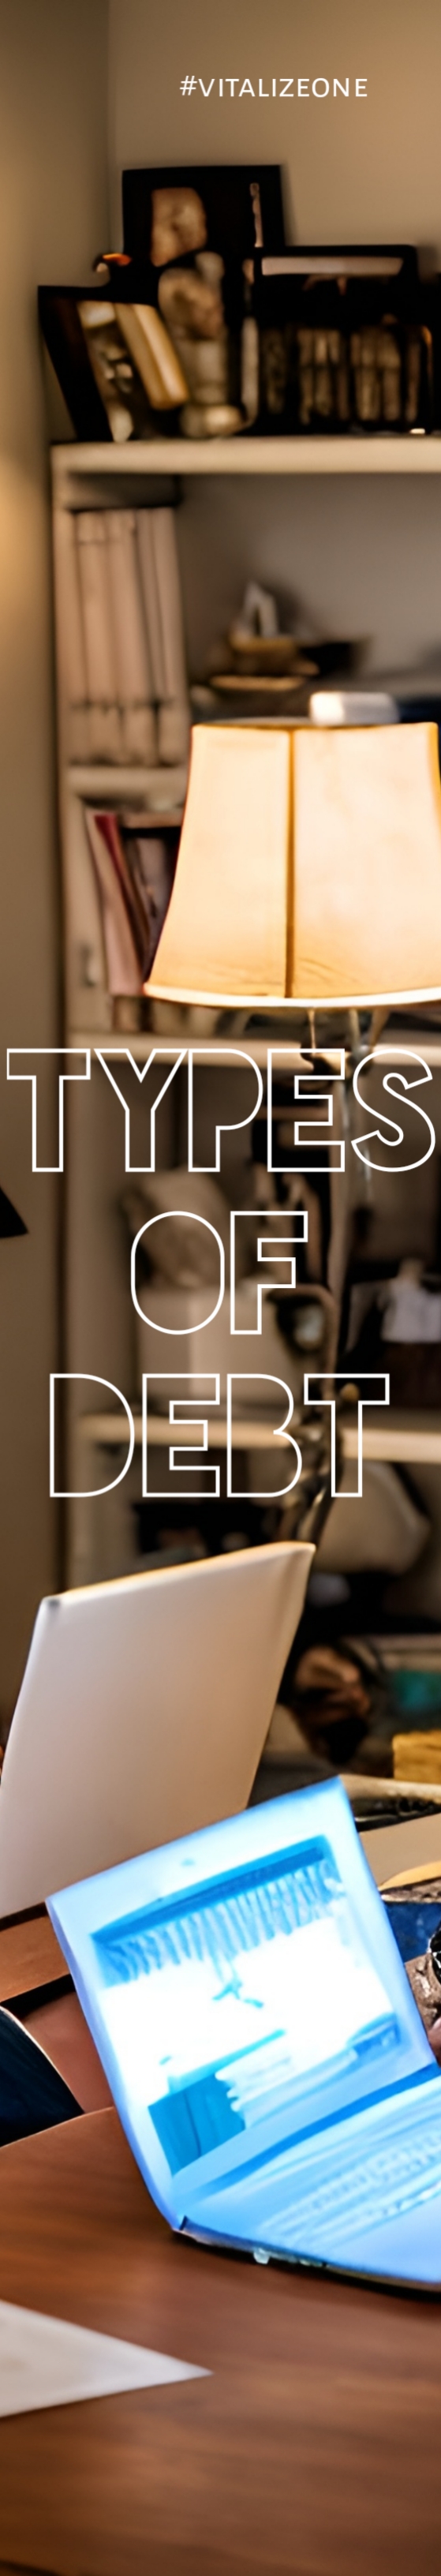 Debt 101: Types of Debts and How to Utilize Them by Chatty Garrate | VitalyTennant.com | #vitalizeone